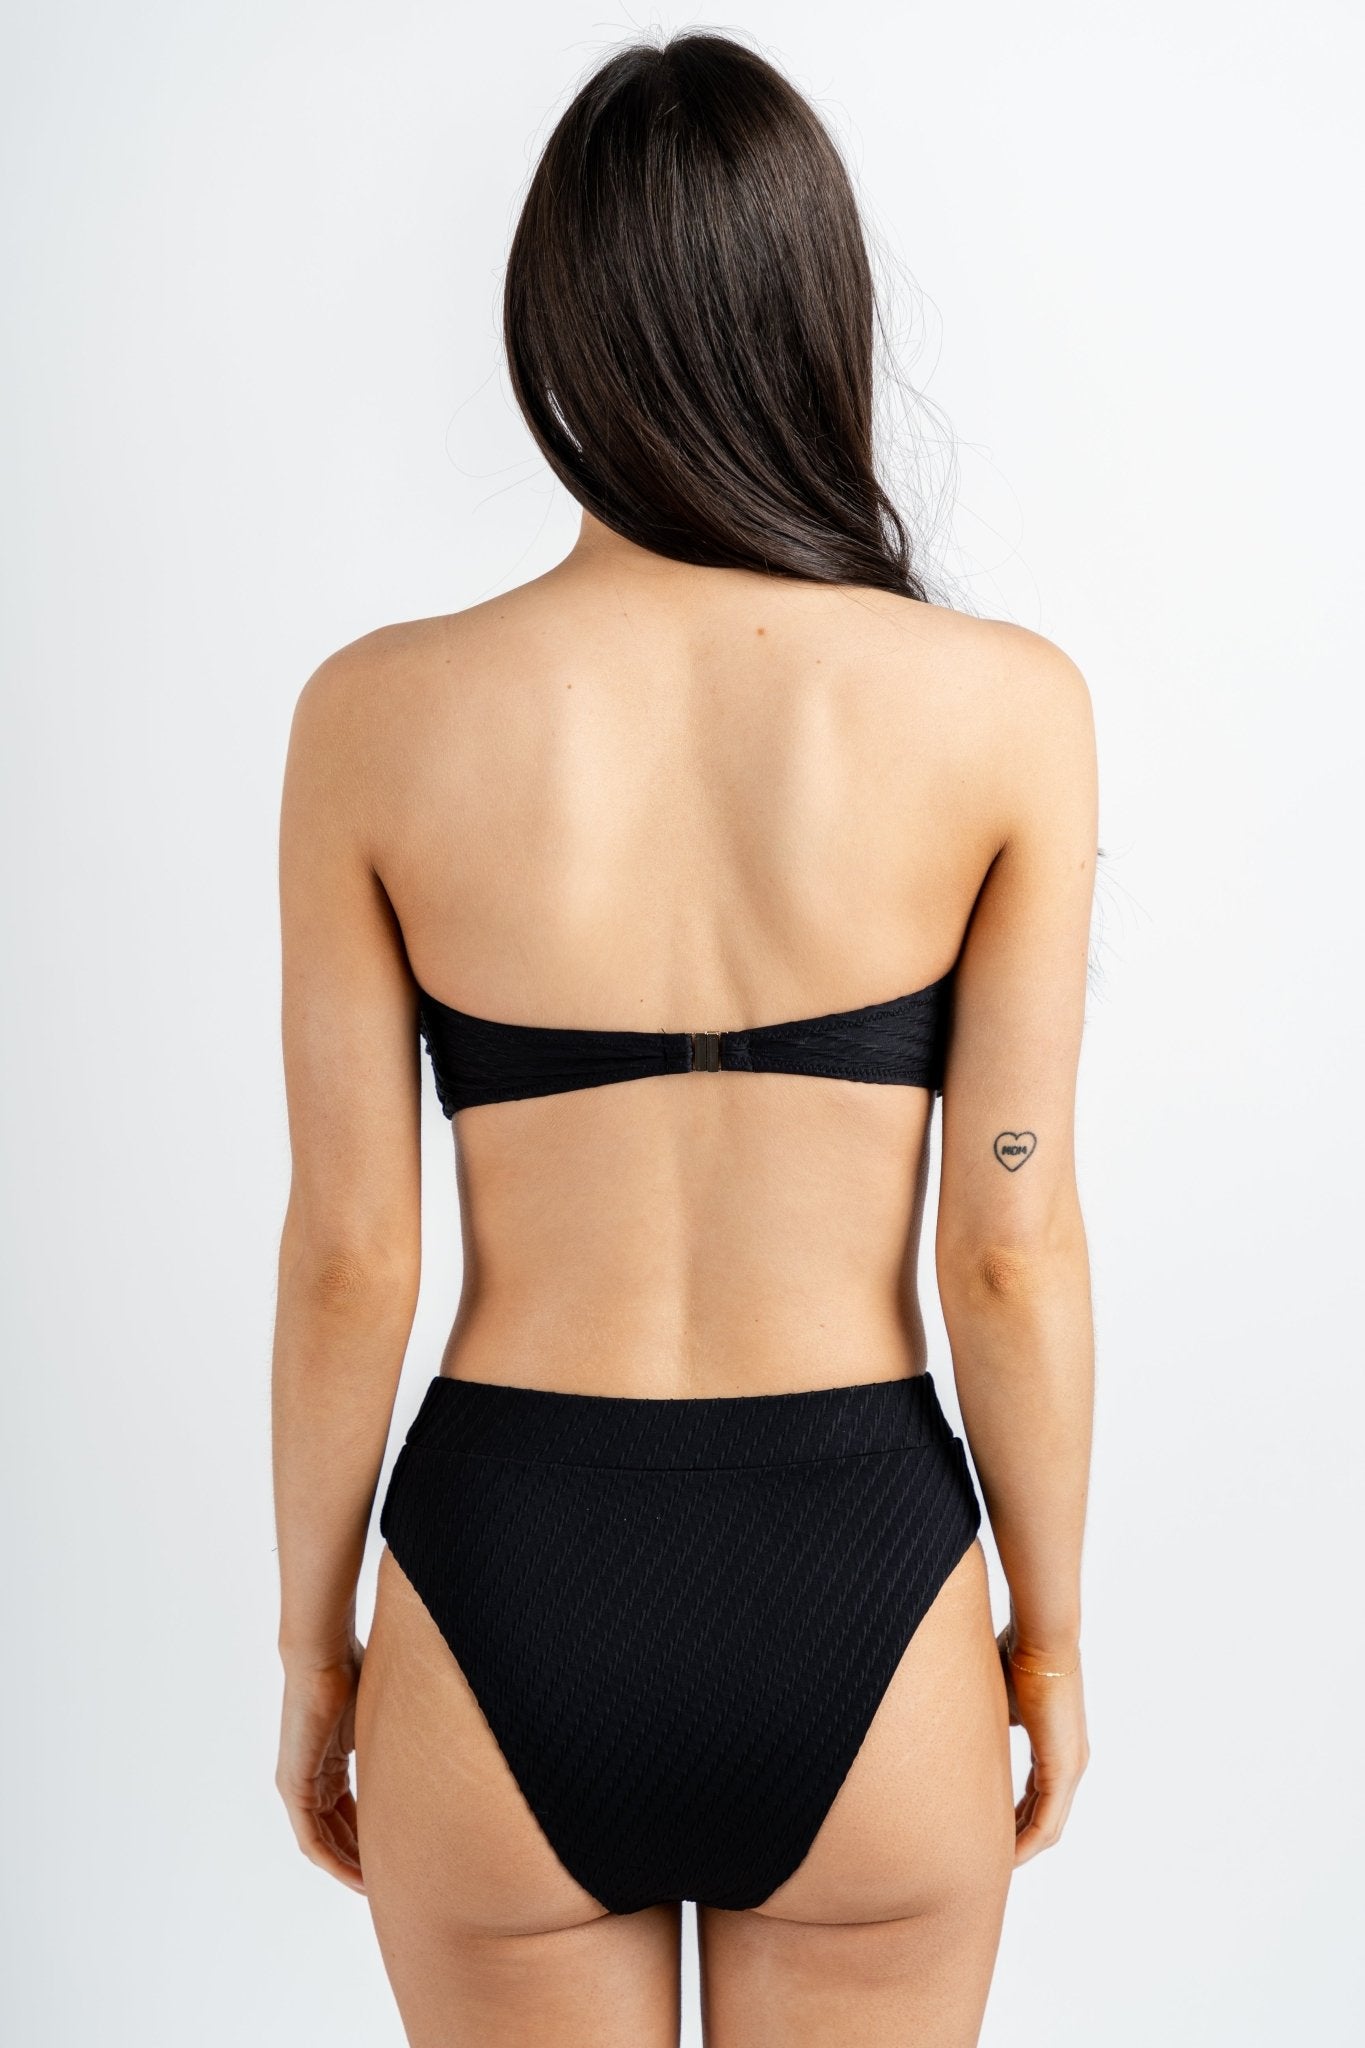 Textured bandeau bikini top black - Cute swimsuit - Affordable Swimsuits at Lush Fashion Lounge Boutique in Oklahoma City